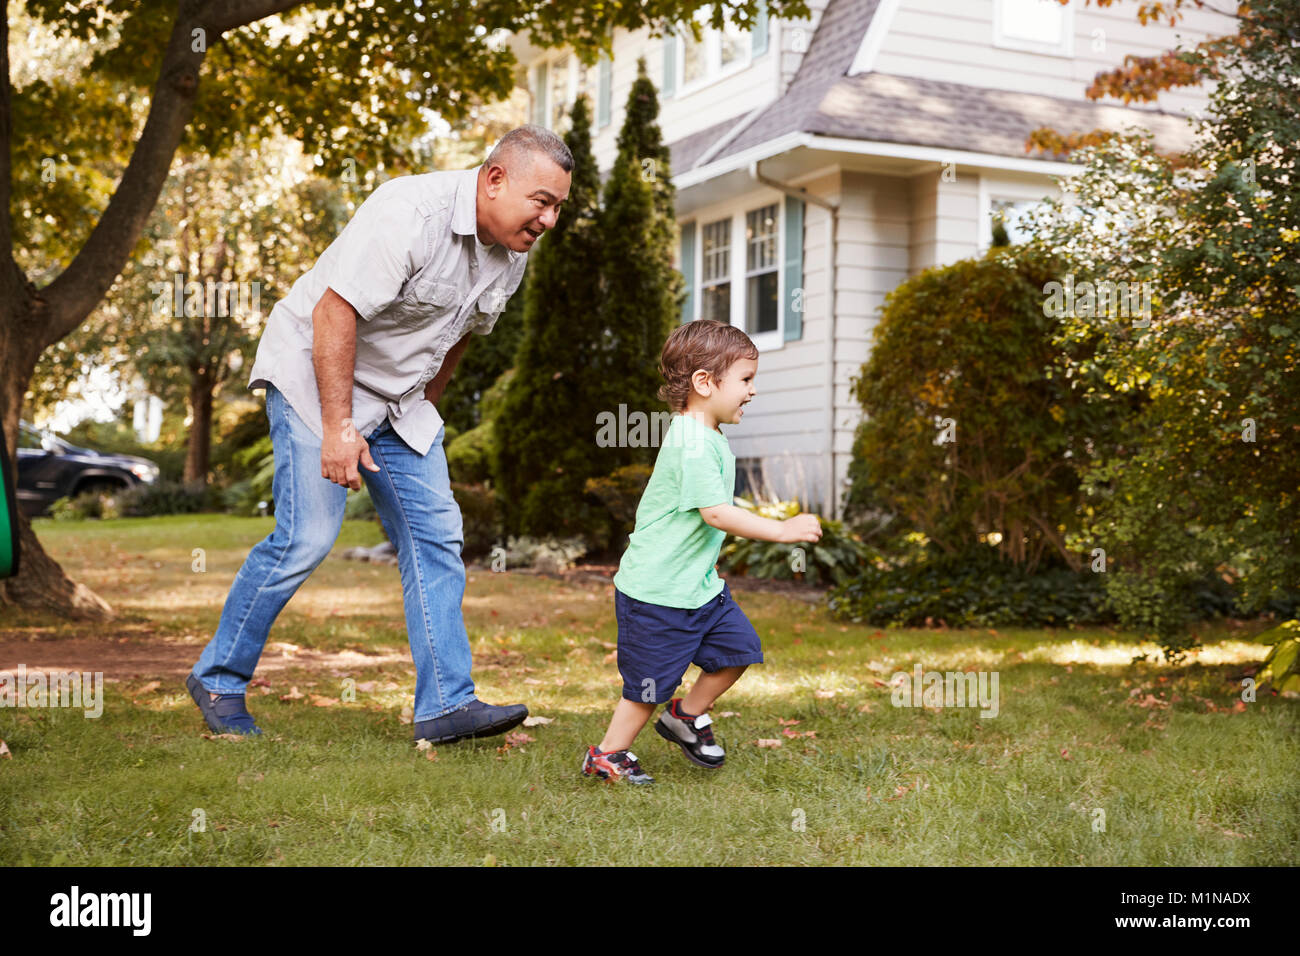 Grandfather Playing In Garden With Grandson Stock Photo